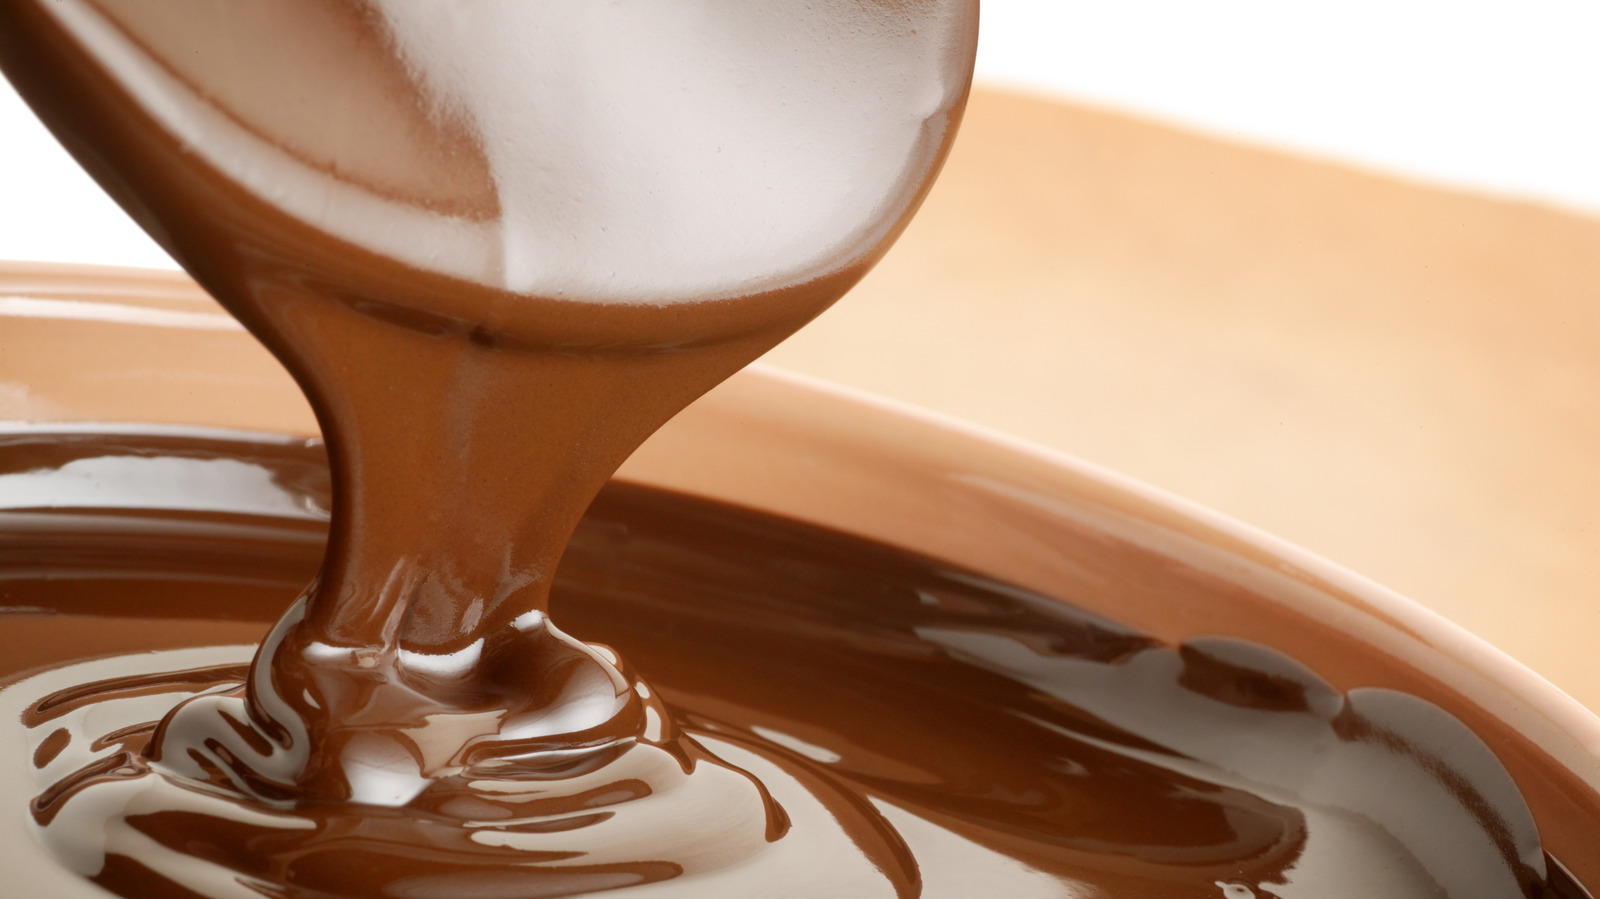 How to Melt Chocolate - Tips for Melting Chocolate